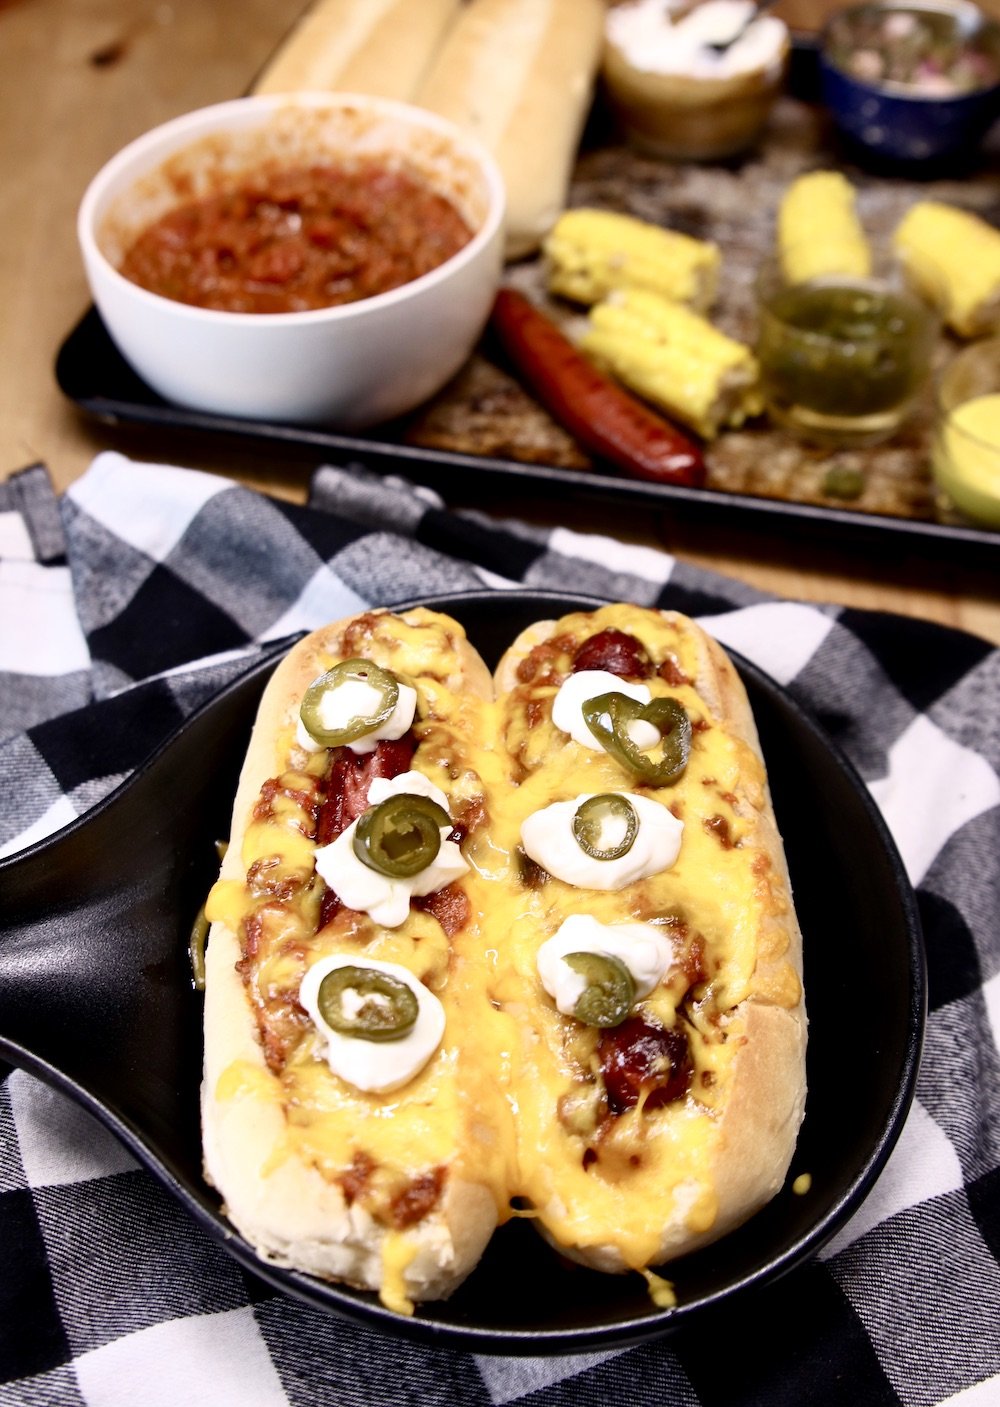 chili dogs with sour cream and jalapenos